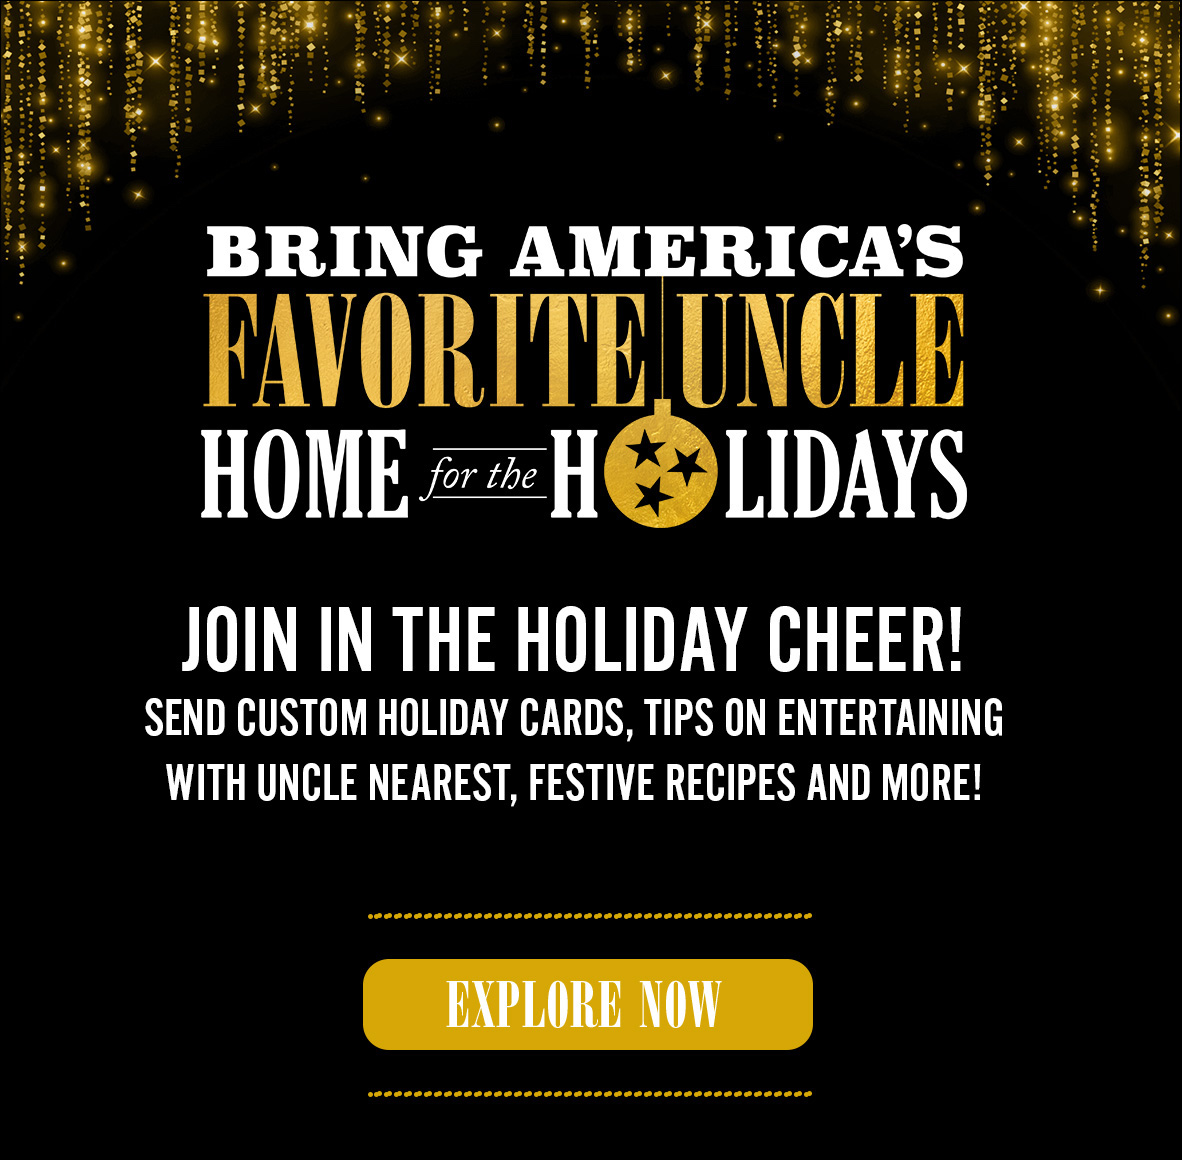 Bring America's Favorite Uncle Home for the holidays. Join in the holiday cheer. Send custom holiday cards, tips on entertaining with Uncle Nearest, festive recipes, and more! Explore Now.